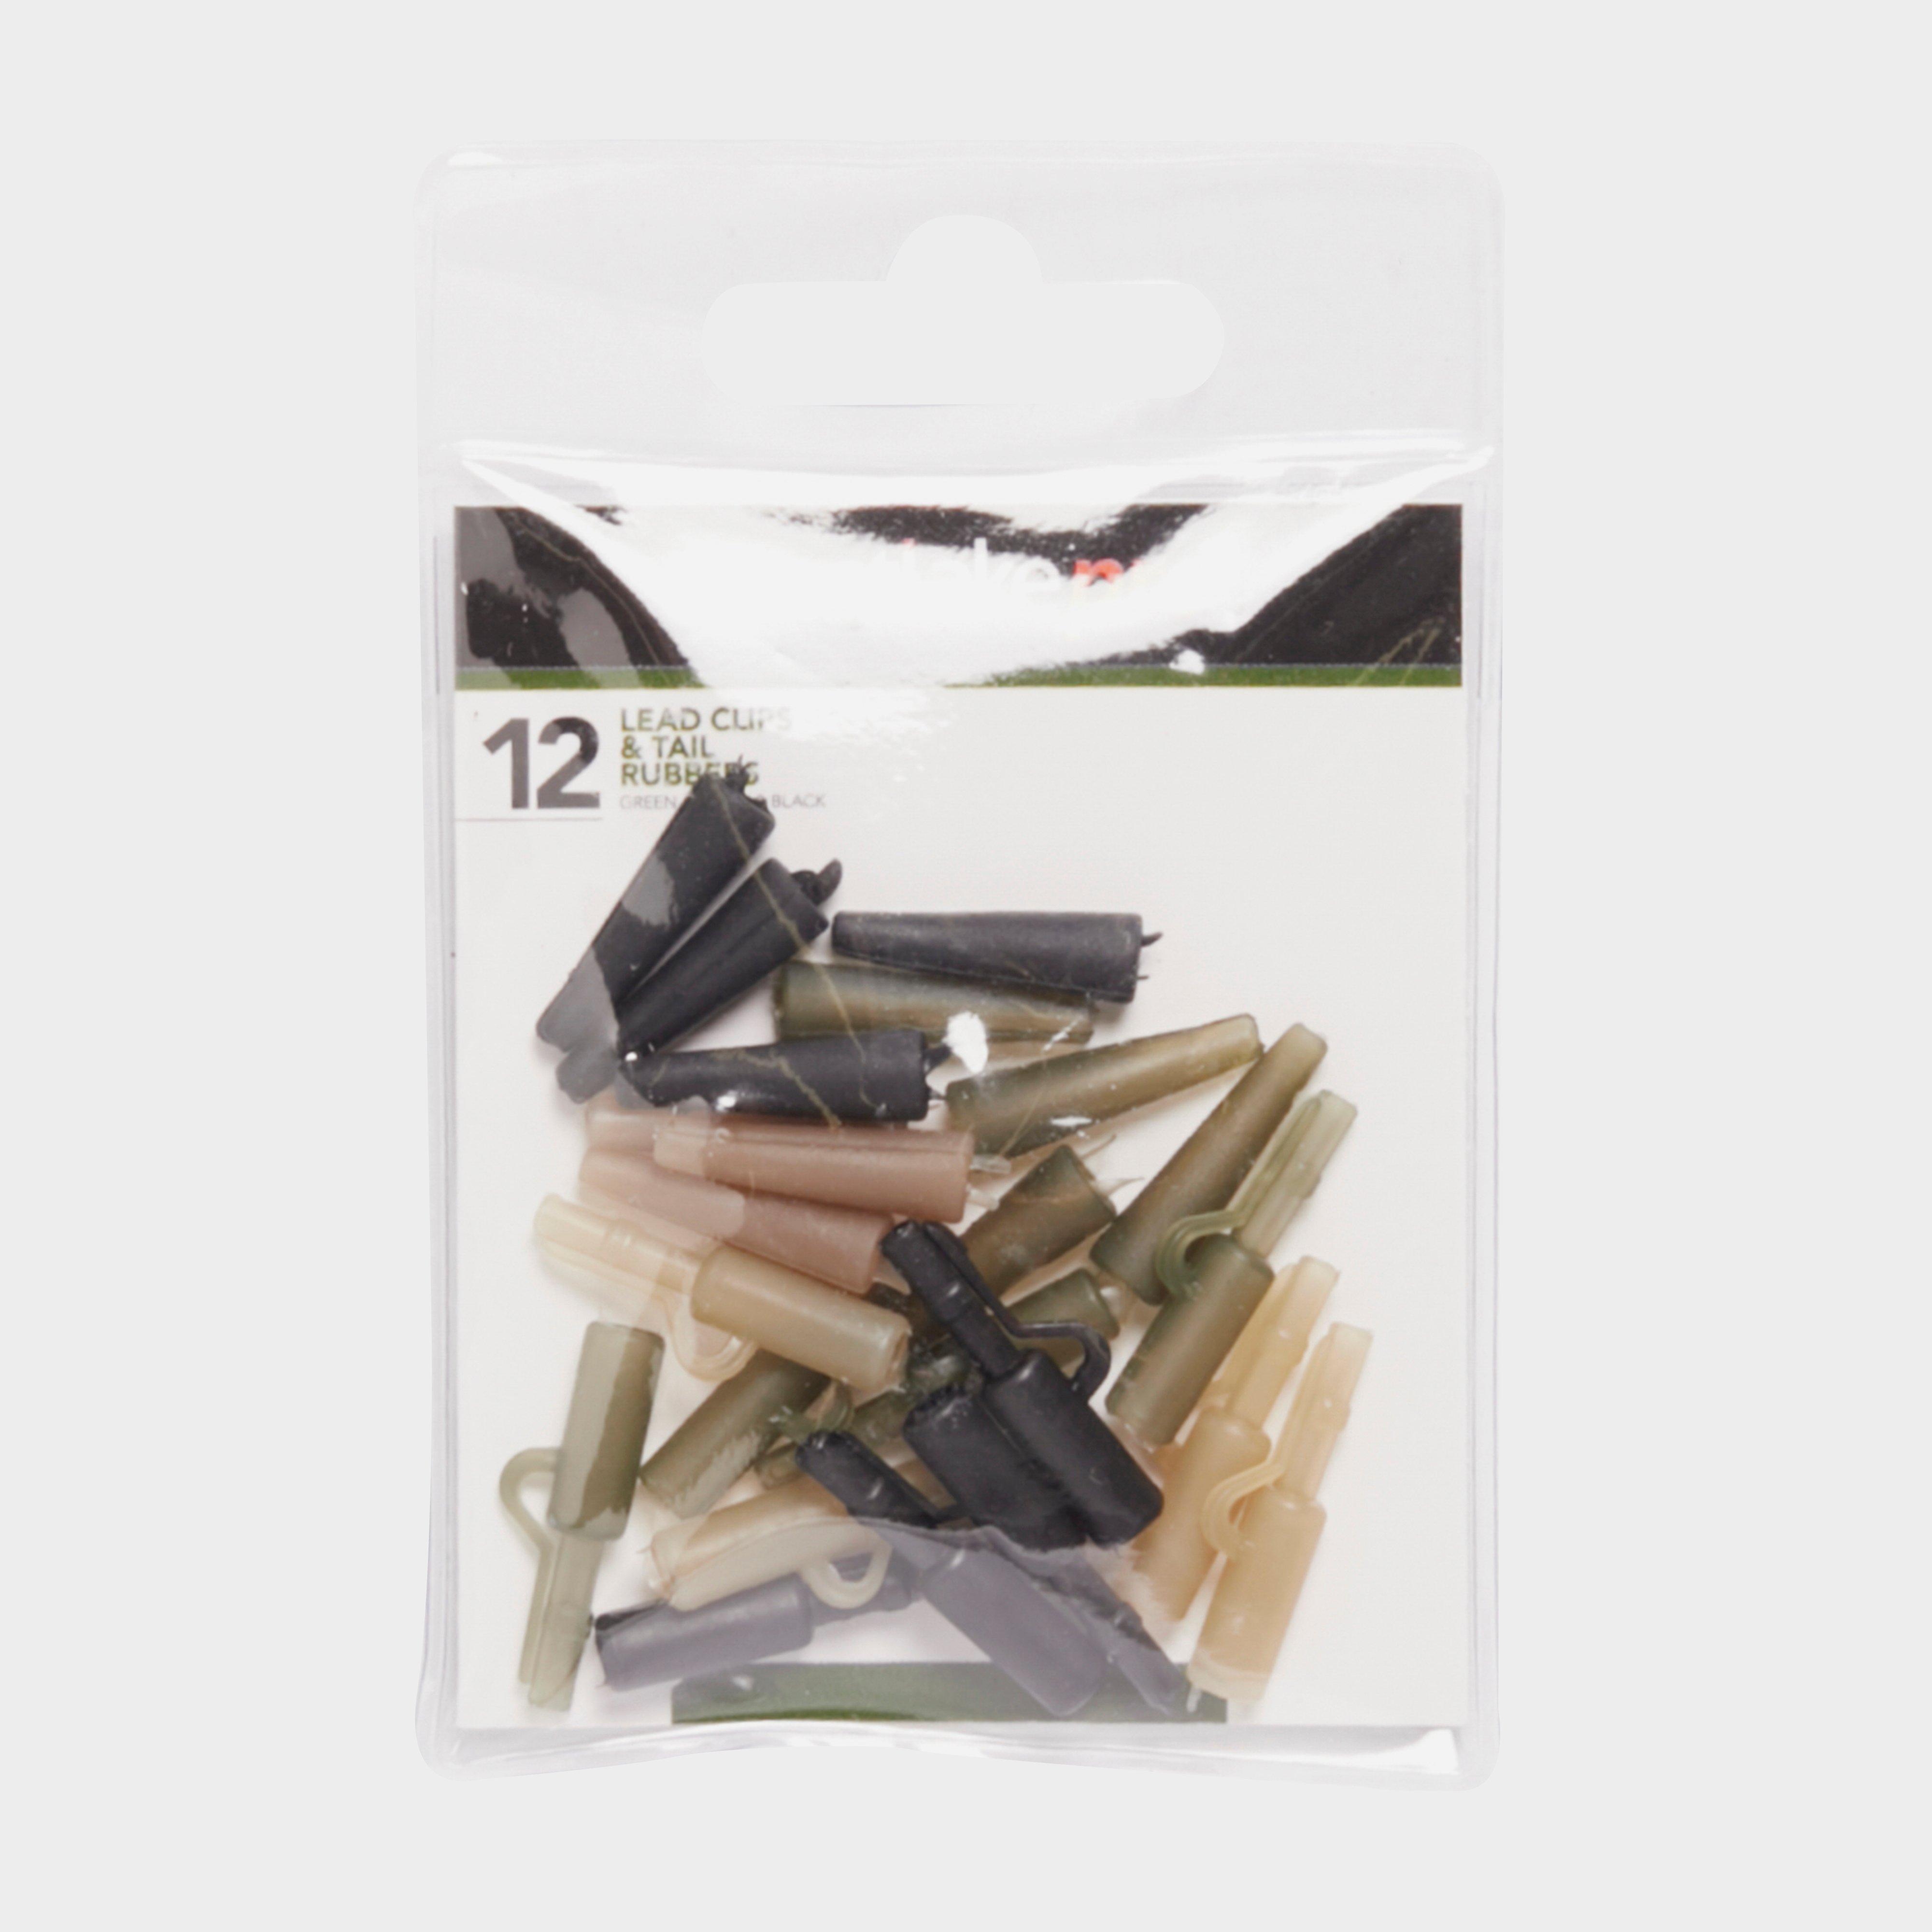 Westlake Lead Clips And Tail Rubbers (mixed) - Assorted/mix  Assorted/mix